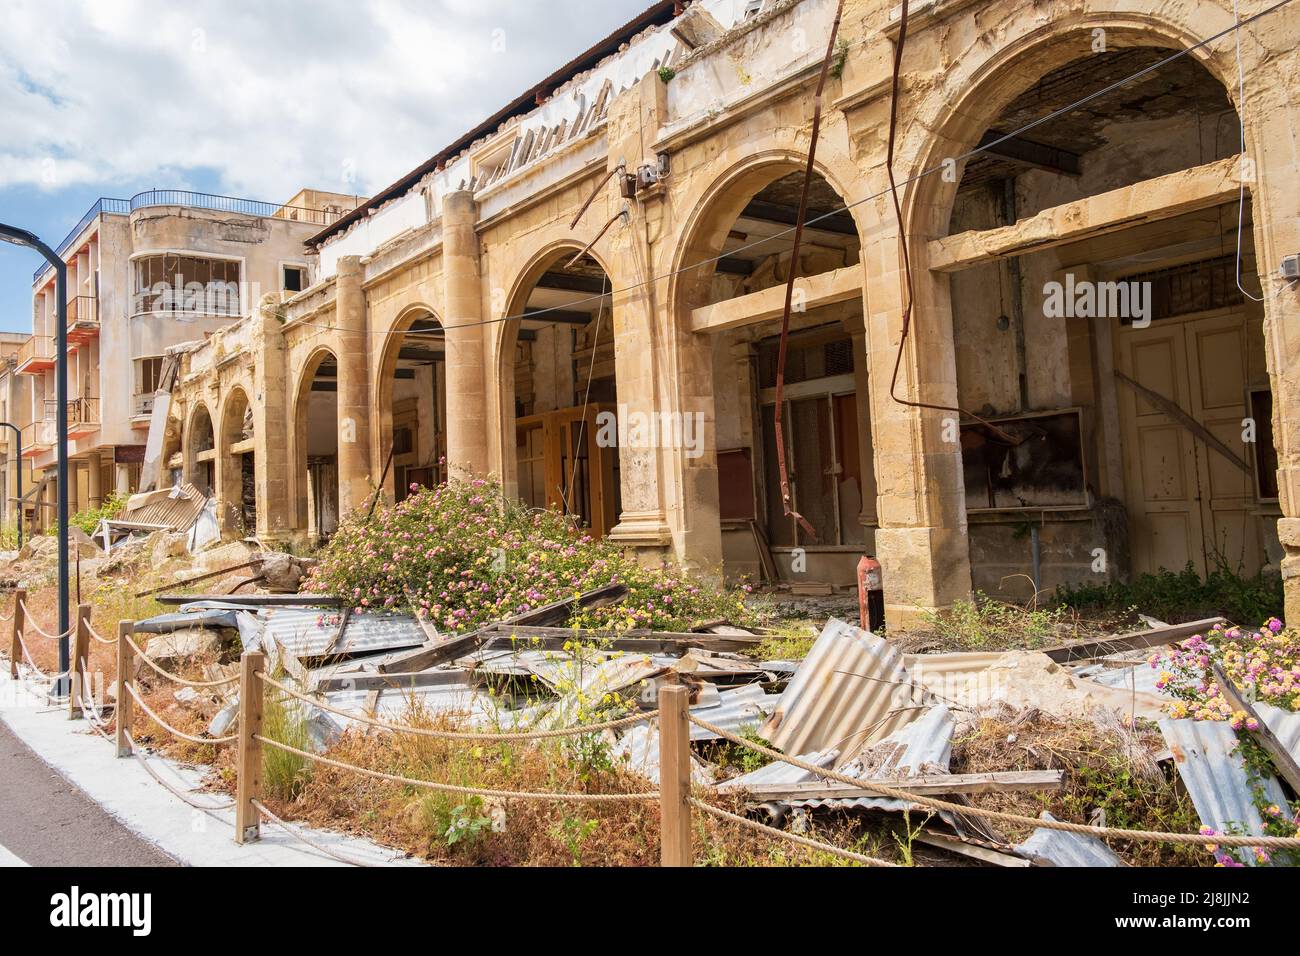 Abandoned buildings and wild vegetation in the Ghost Resort City of Varosha Famagusta in Cyprus Stock Photo